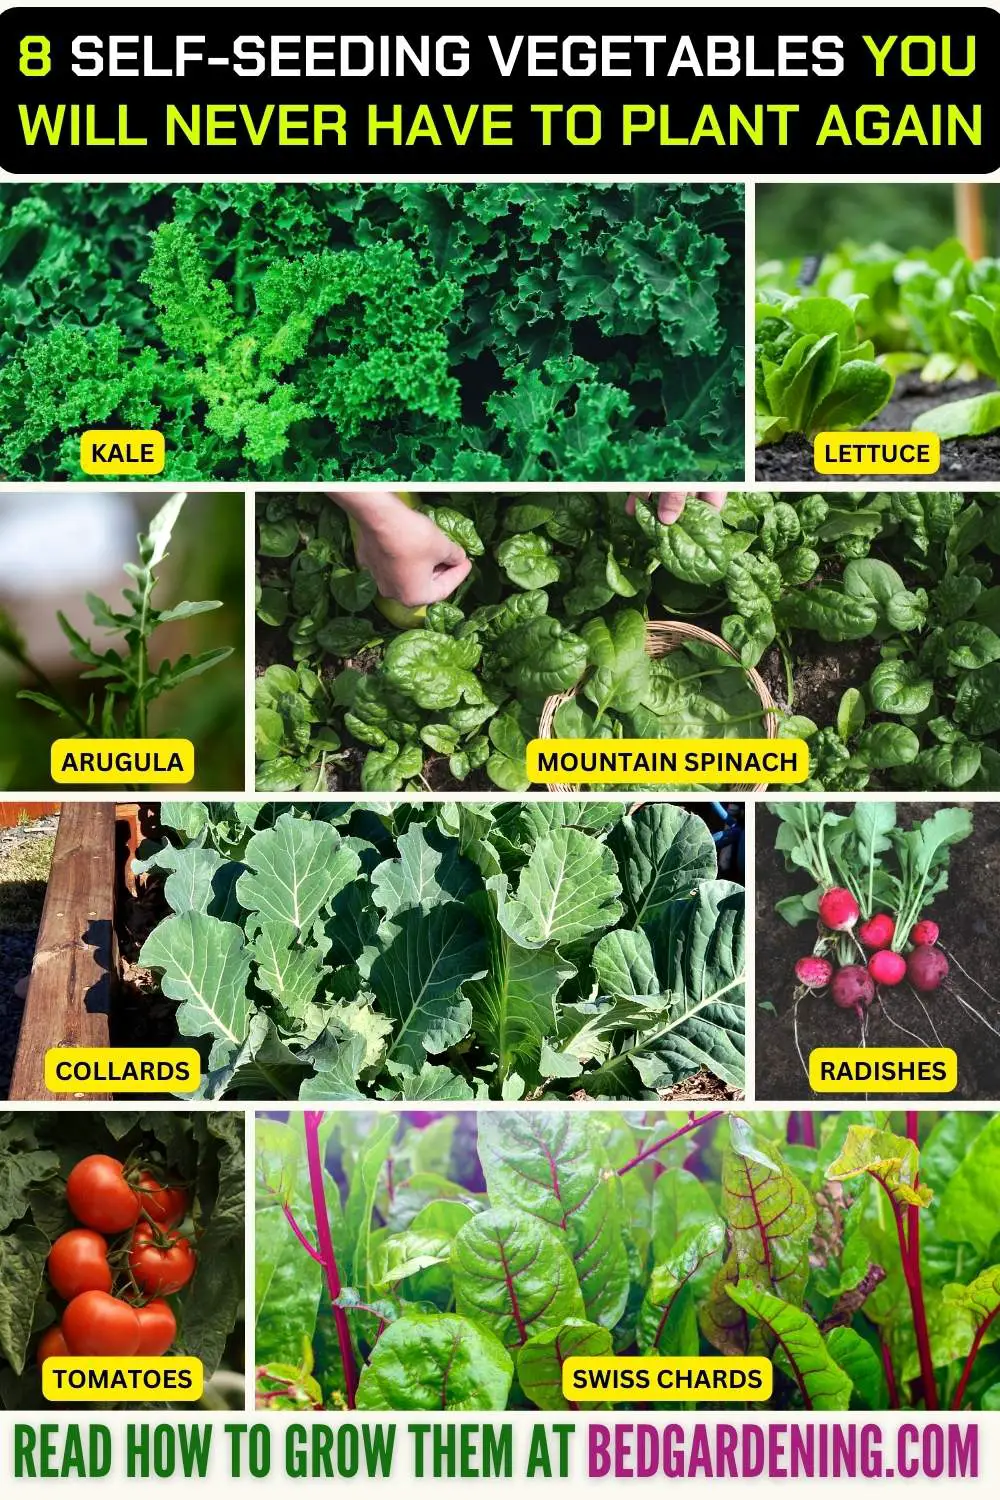 8 Self-Seeding Vegetables You Will Never Have To Plant Again